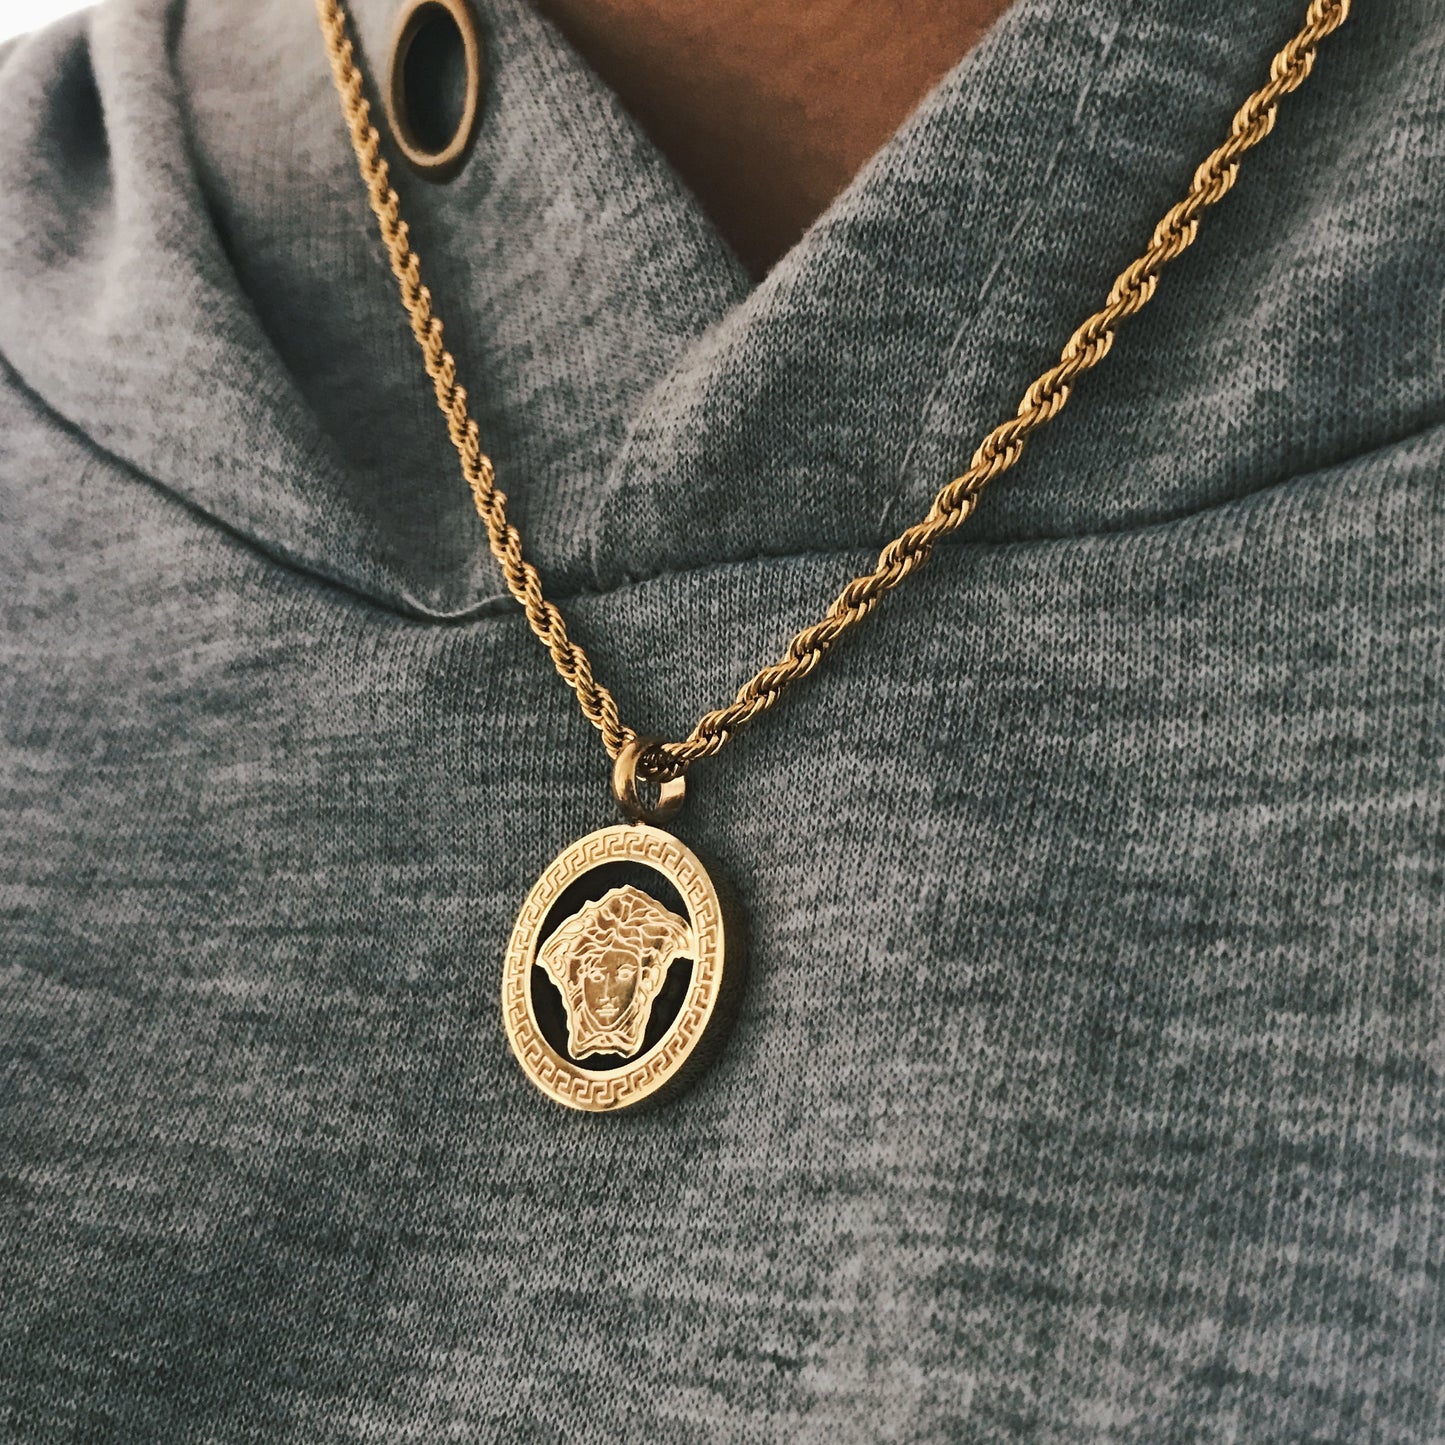 Micro Medusa Medallion - Necklace - Cold Gold Mens Gold Urban Contemporary Hiphop Jewelry